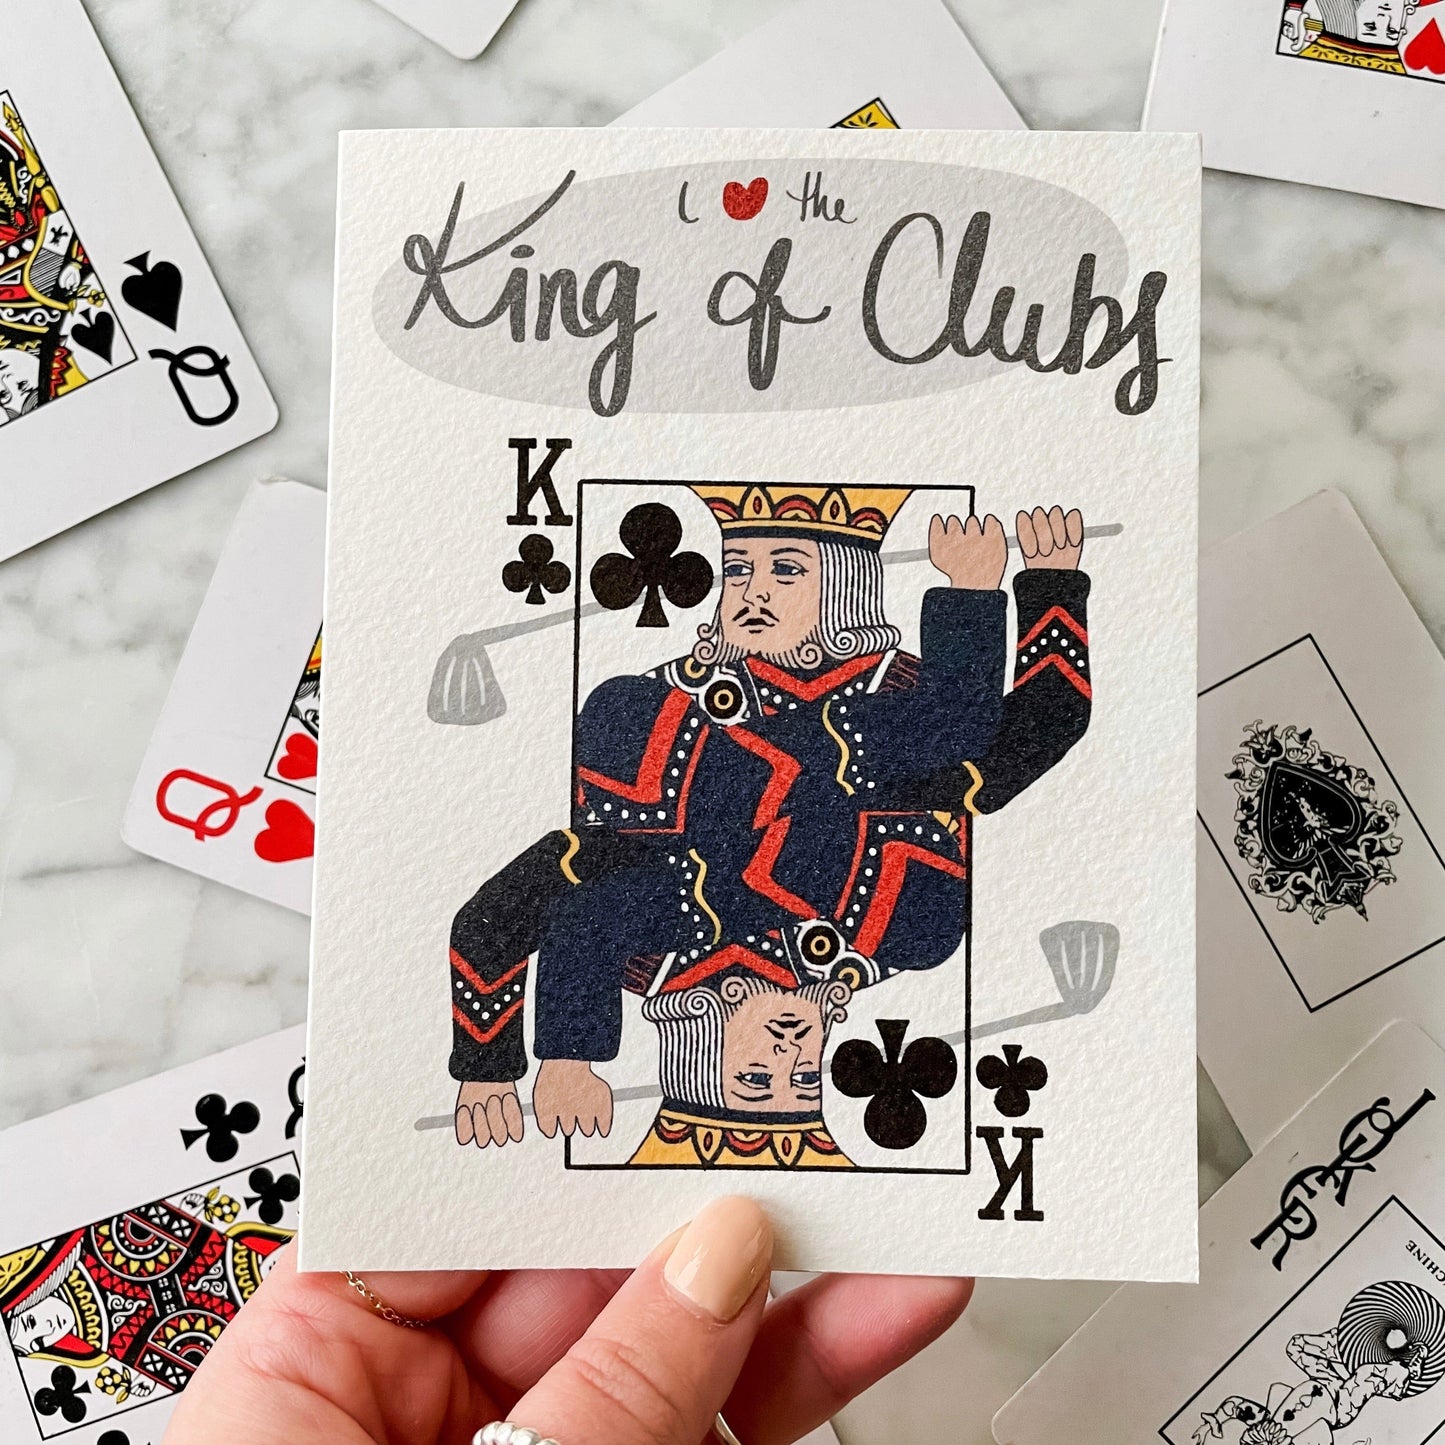 The King of Golf Clubs Card. Birthday Card for Men. Boyfriend Birthday Card. Dad Birthday Card.